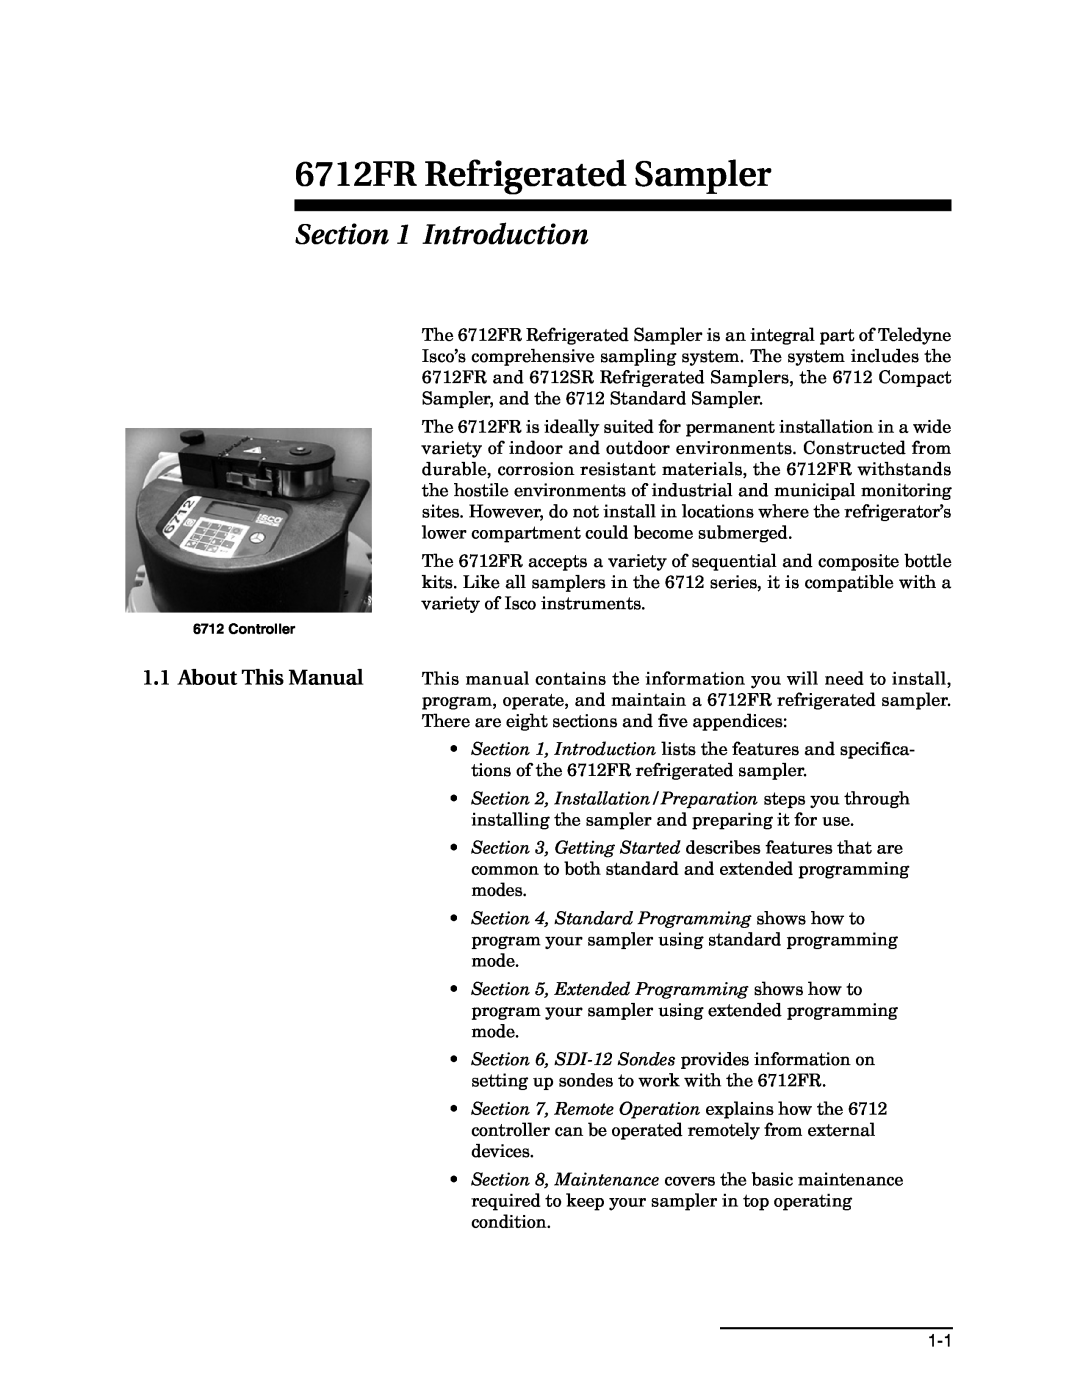 Teledyne manual Introduction, About This Manual, 6712FR Refrigerated Sampler 